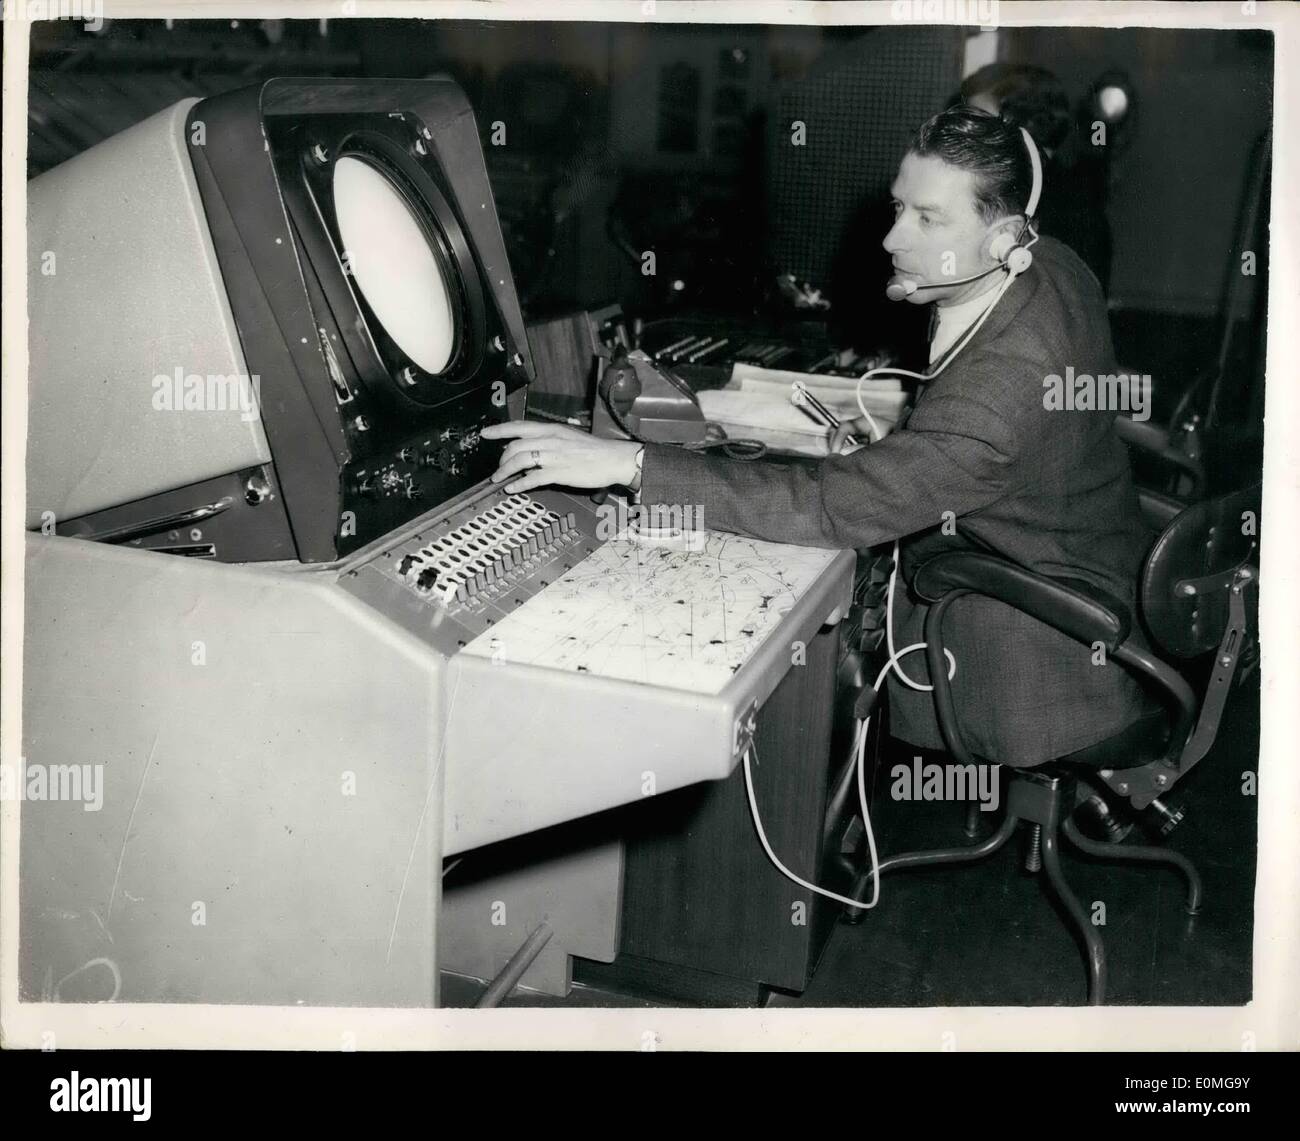 Mar. 18, 1955 - 18-3-55 Press visit to New Southern Air Traffic Control Centre at London Airport. A press visit was held today at London Airport to the new Southern Air Traffic Control Centre which is to replace the existing centre at Uxbridge. It contains airways and radar control to supervise the Civil Aviation for the whole of Southern England. It has been specially designed to cope with the ever increasing traffic to airports in the London area. Keystone Photo Shows: The Supervisor of the new Control Room, Mr. F.G. Henson M.B.E., checking the general air traffic situation. Stock Photo